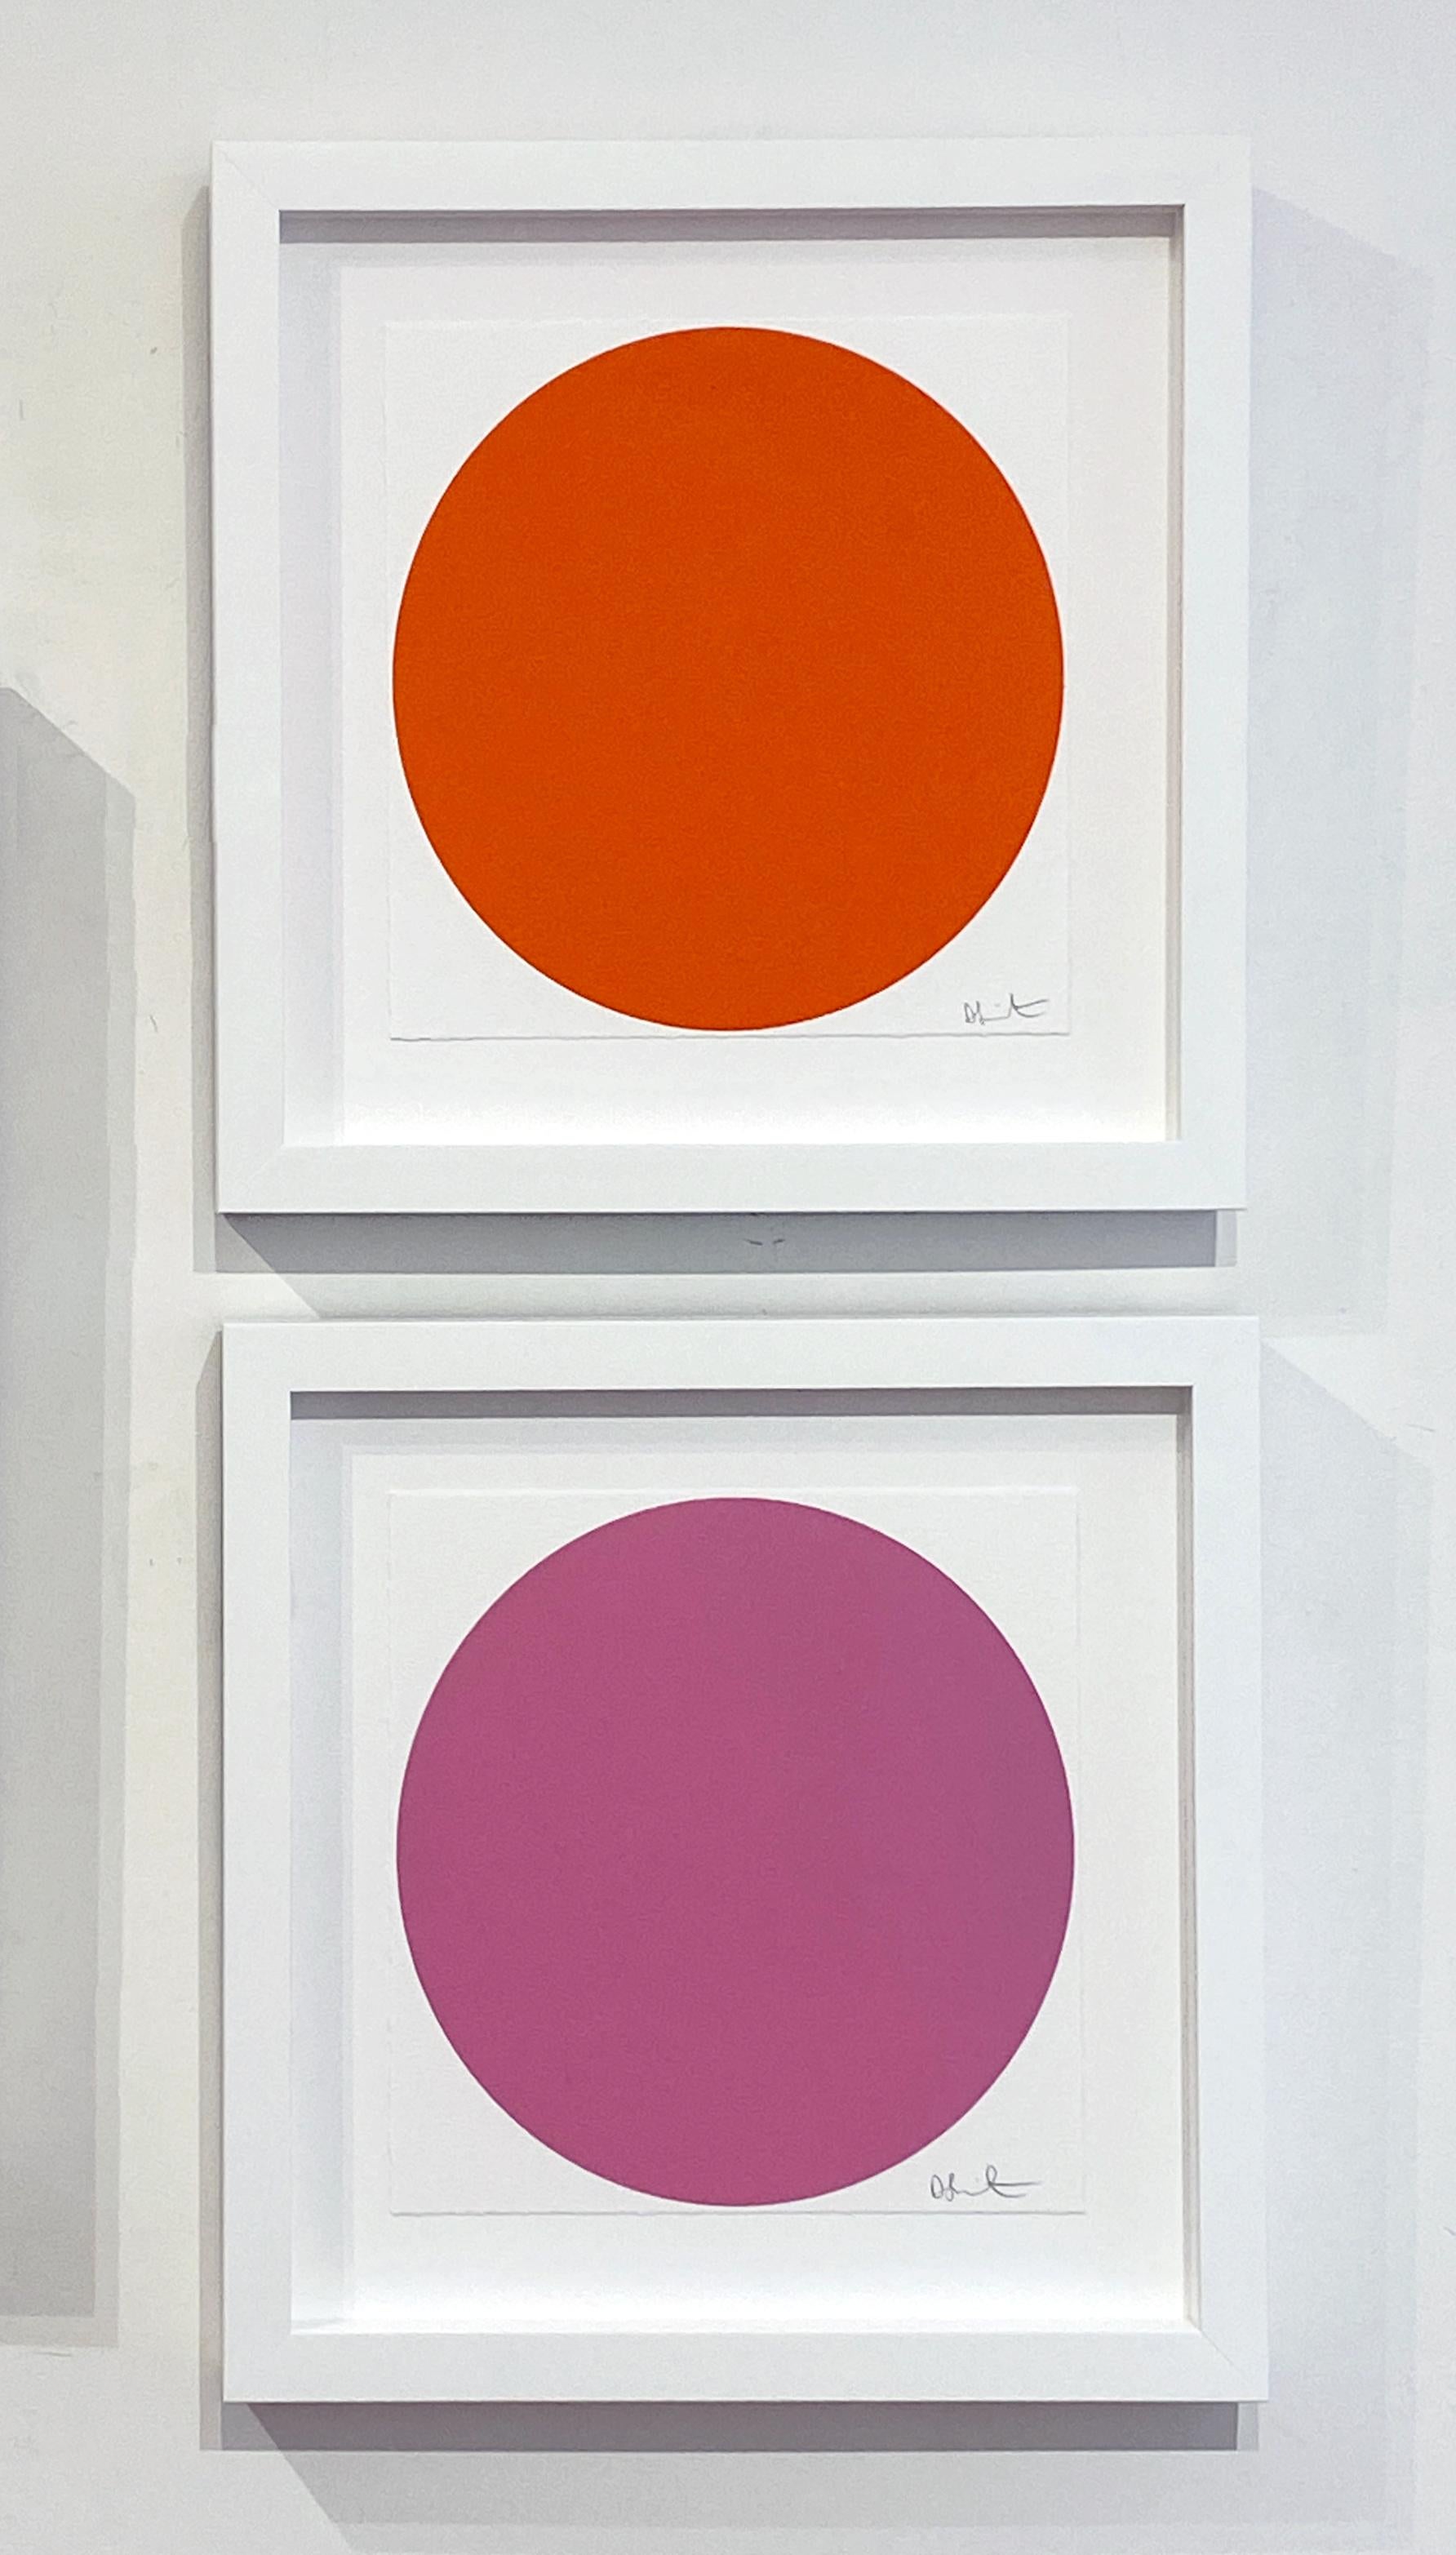 Quisqualic Acid - Young British Artists (YBA) Print by Damien Hirst